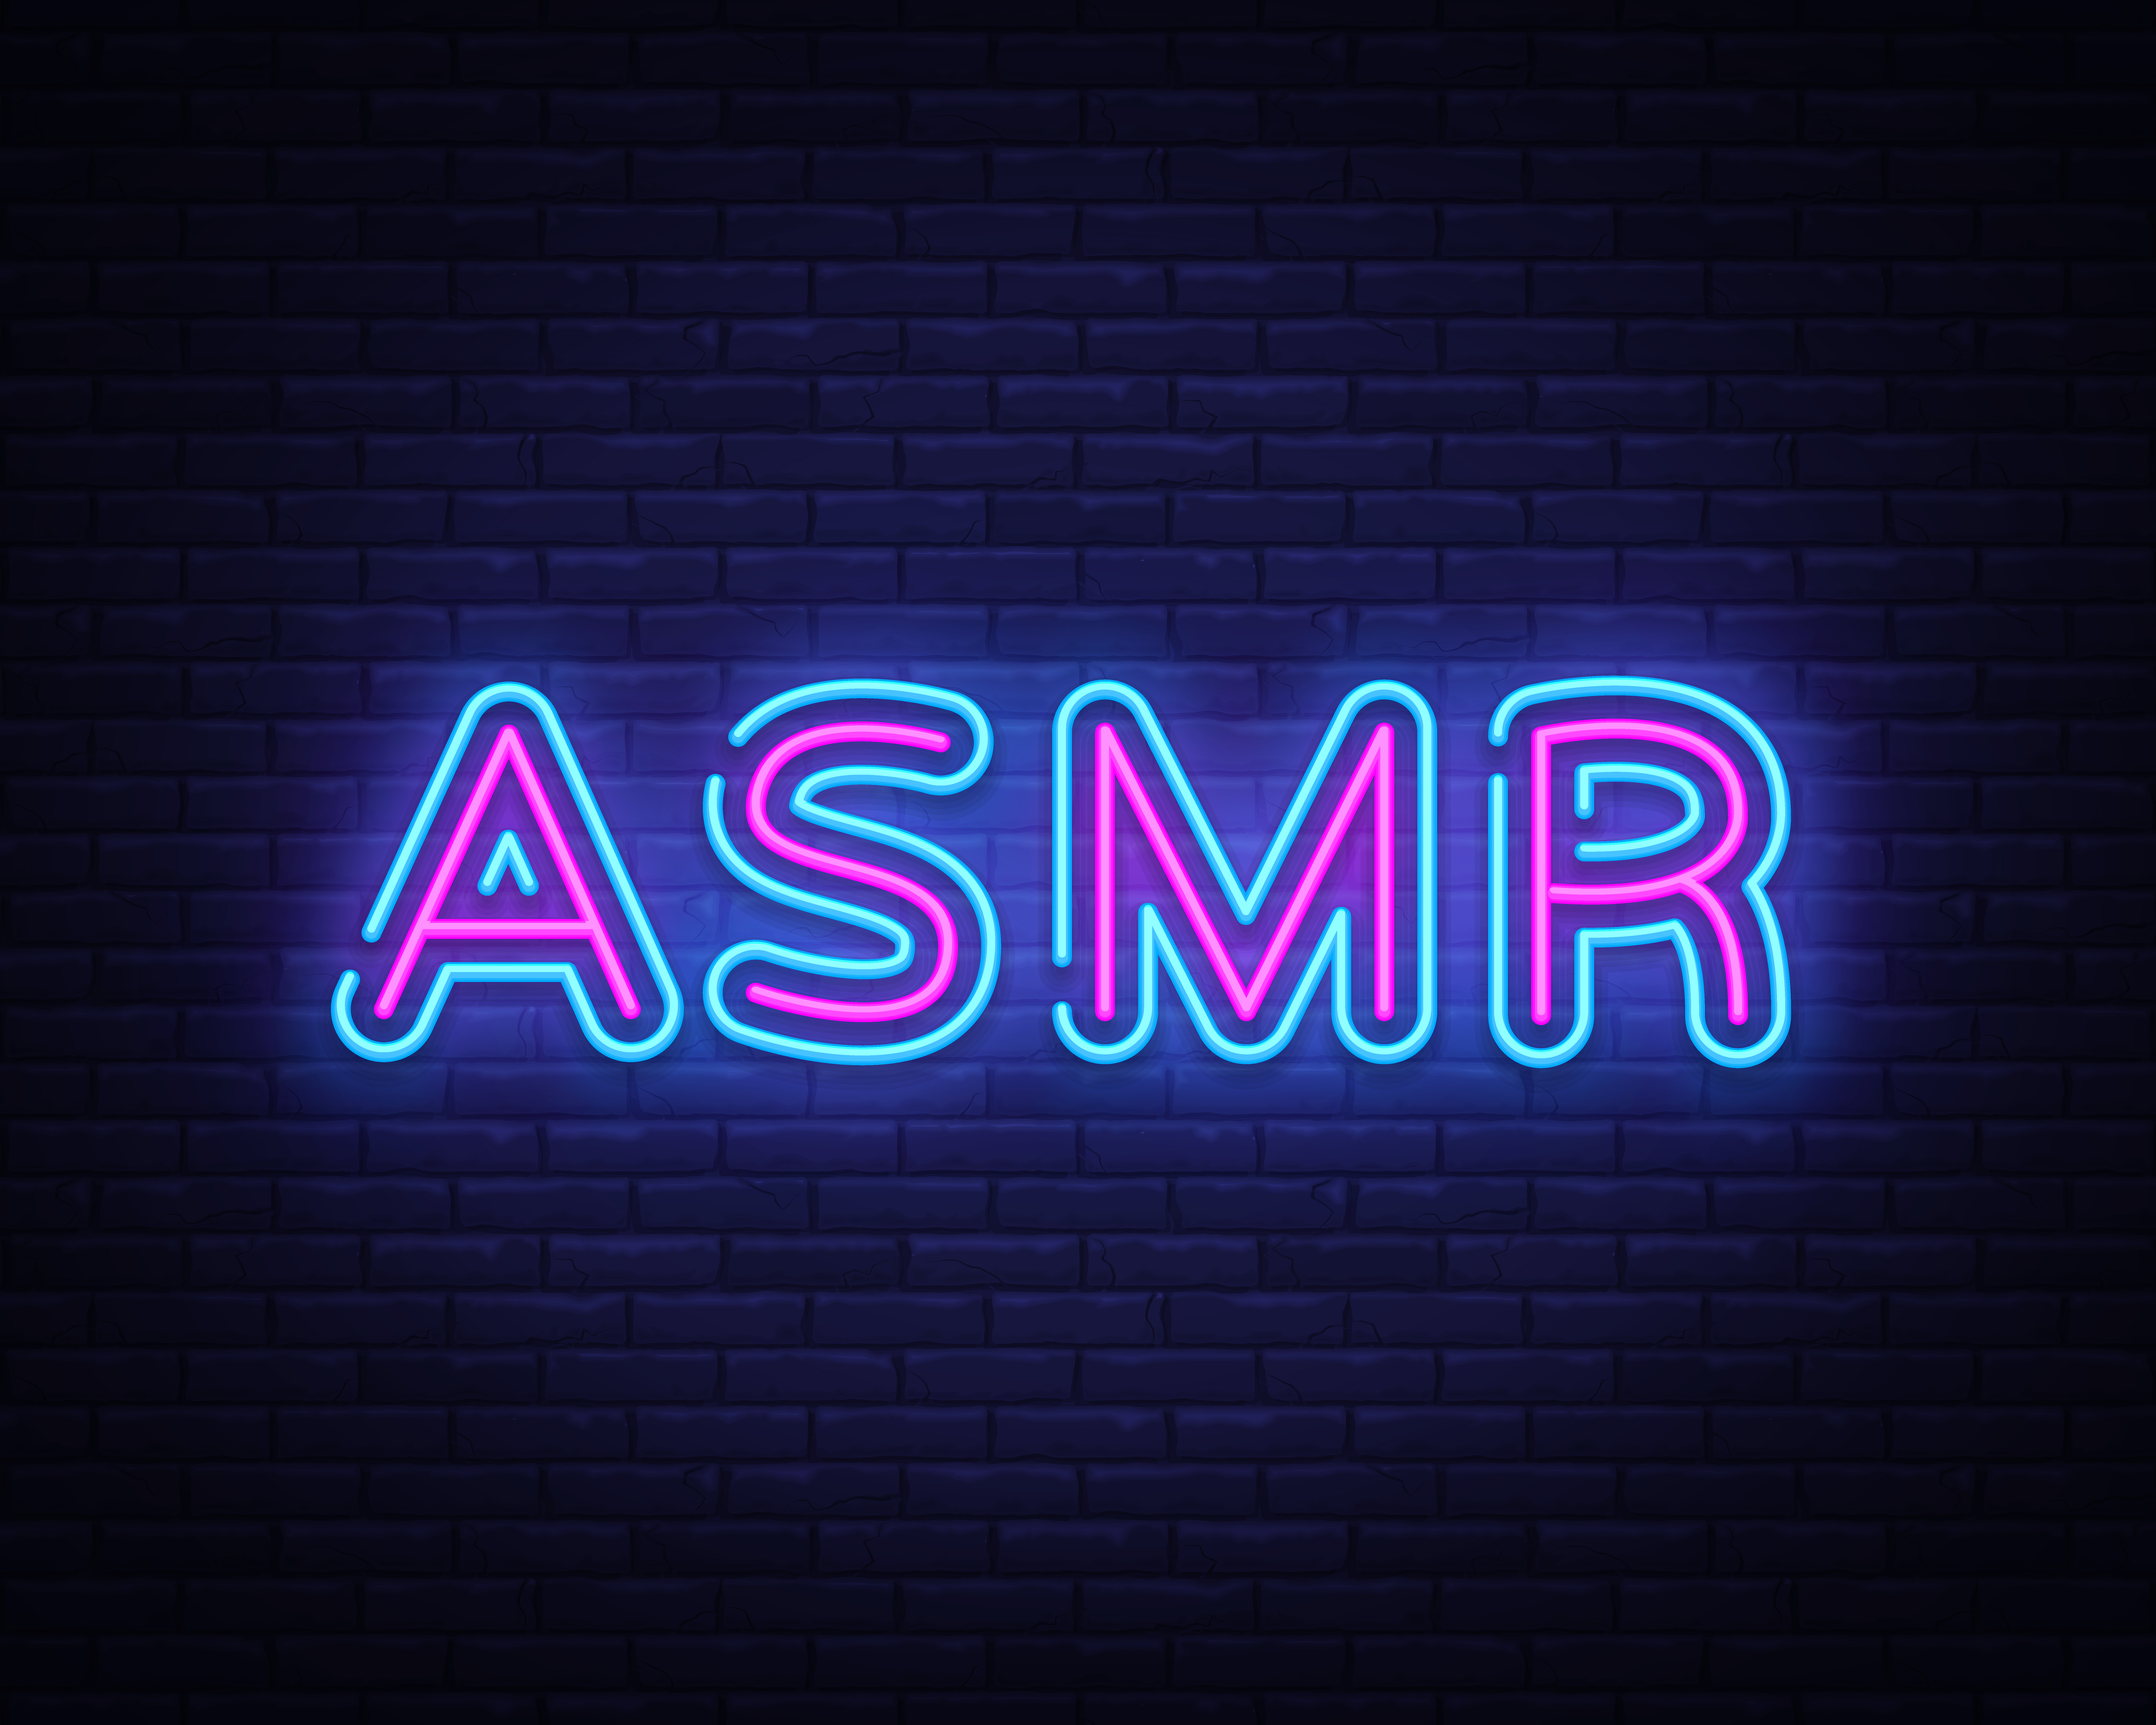 Newegg Makes Some Noise with New ASMR Video Series 